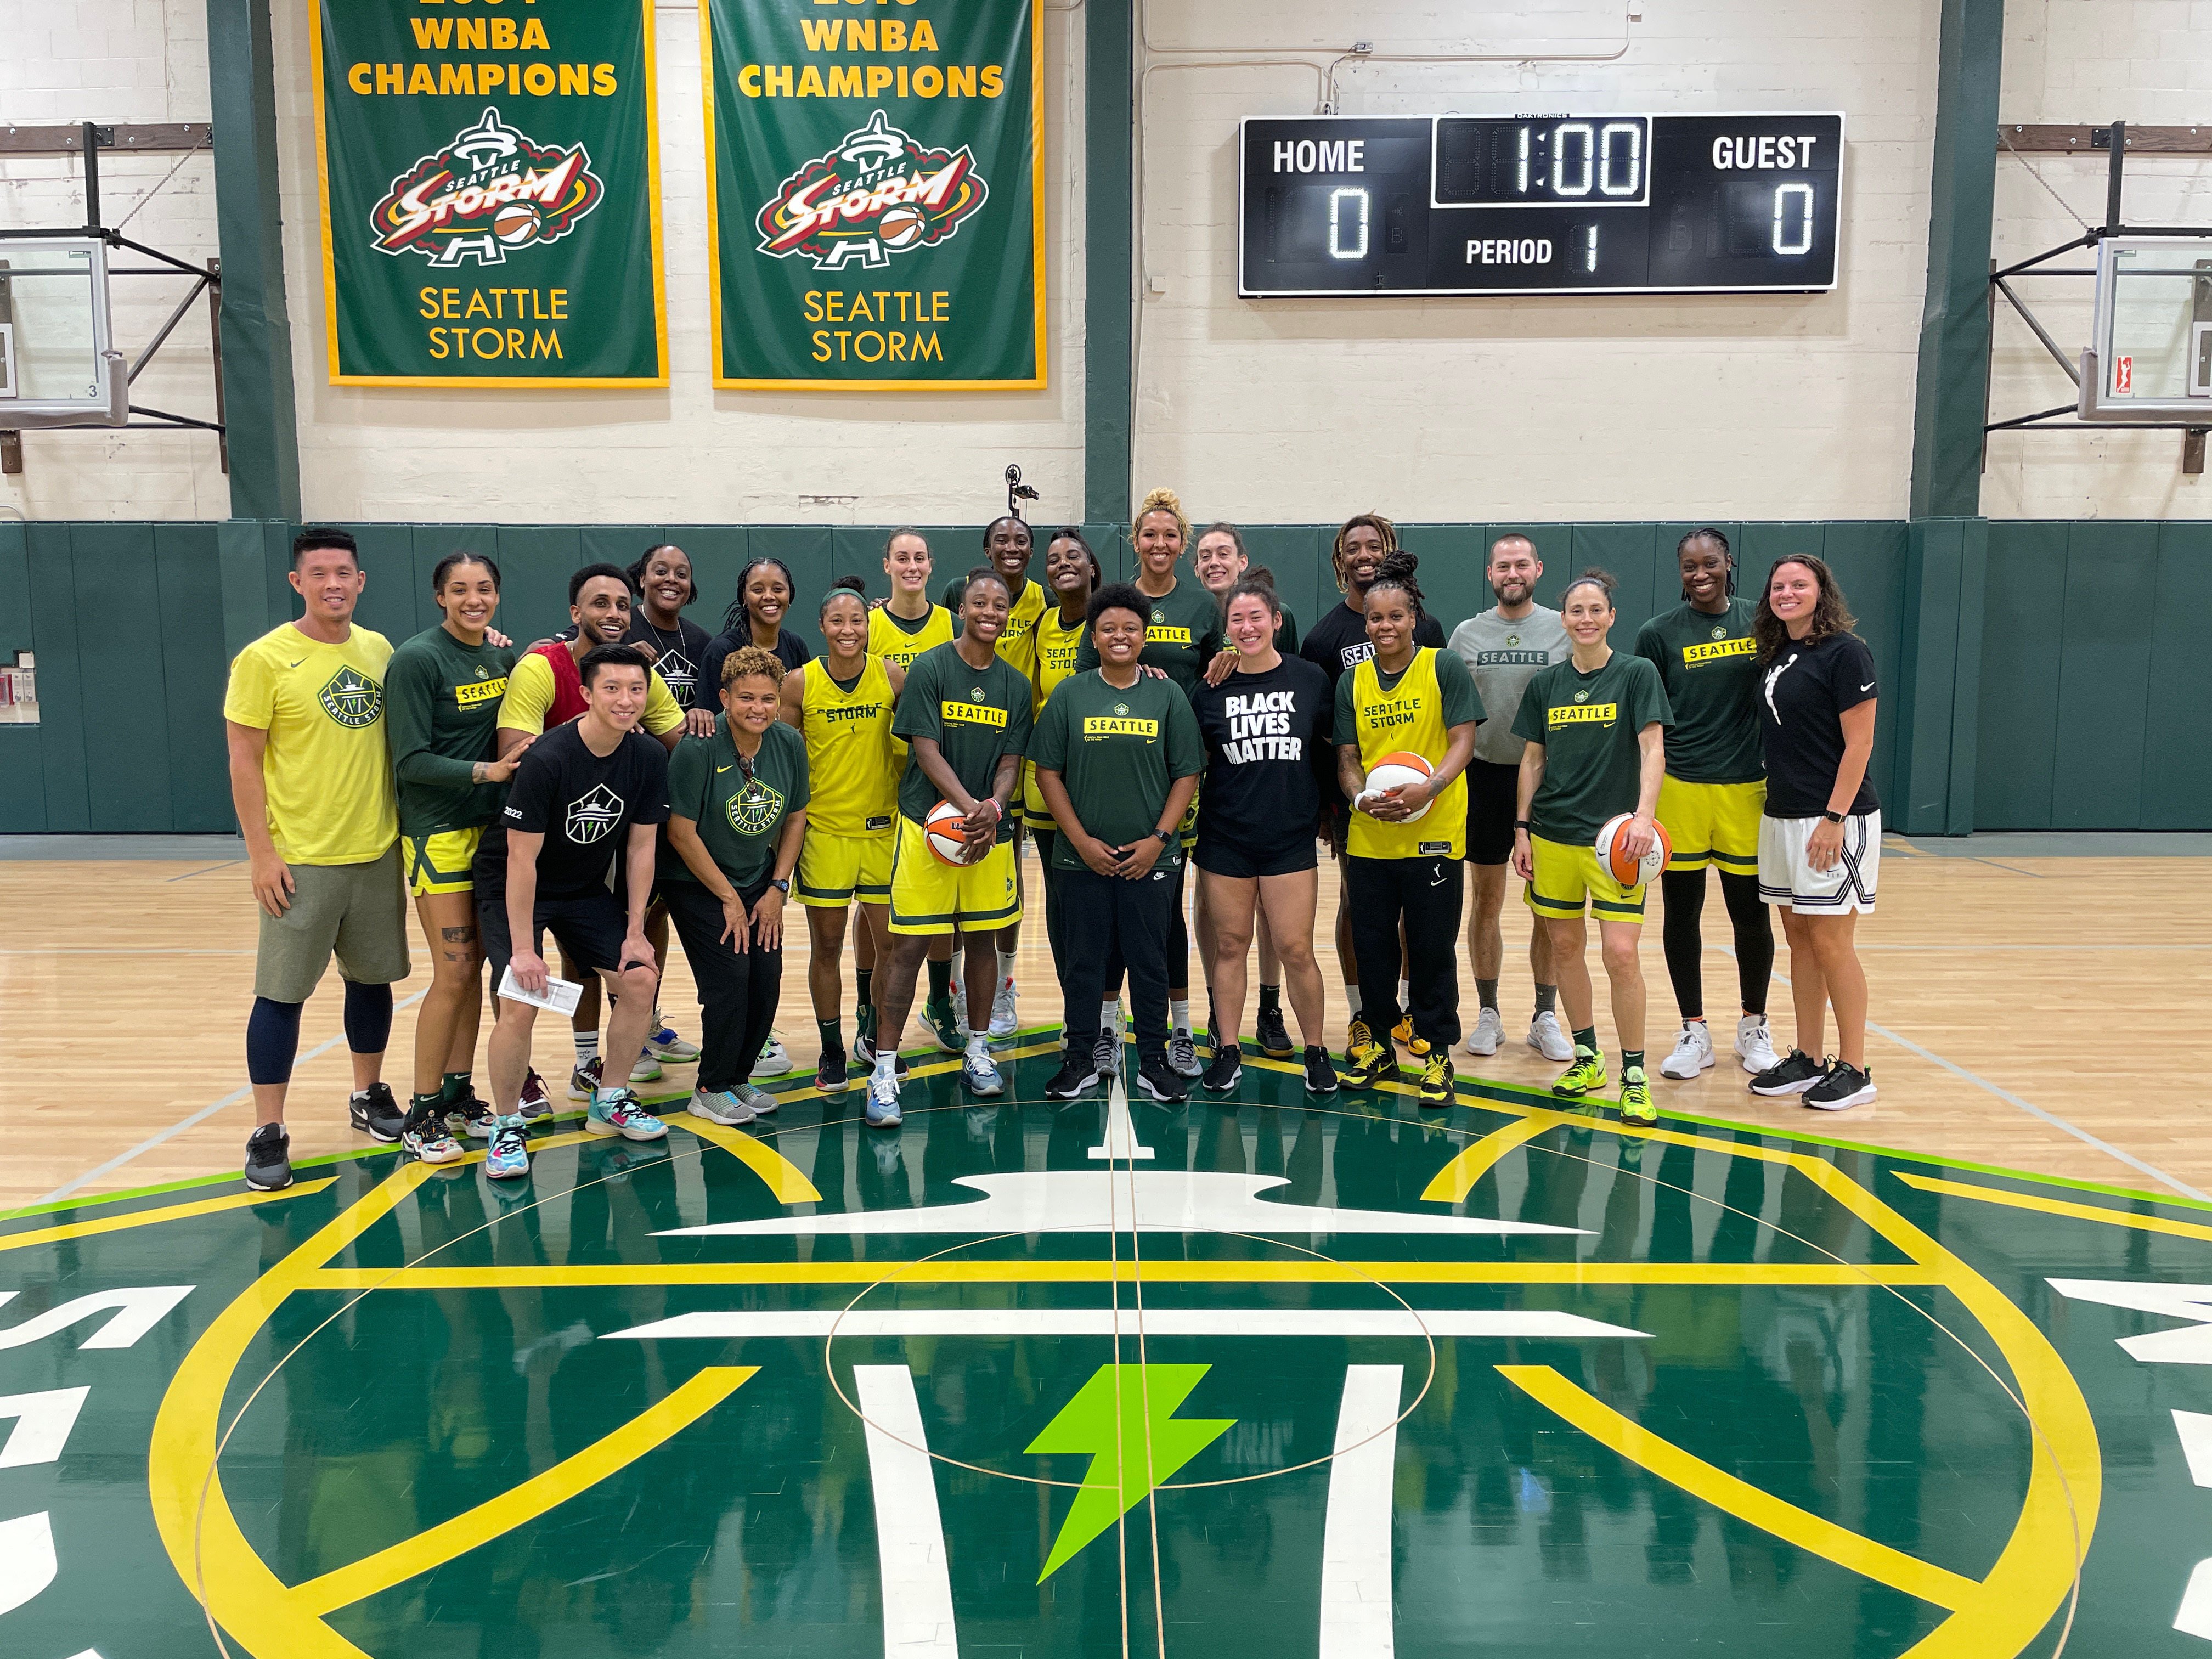 Winson Tam (first from left, front row) has been working with the Seattle Storm since last year. Photo: Winson Tam